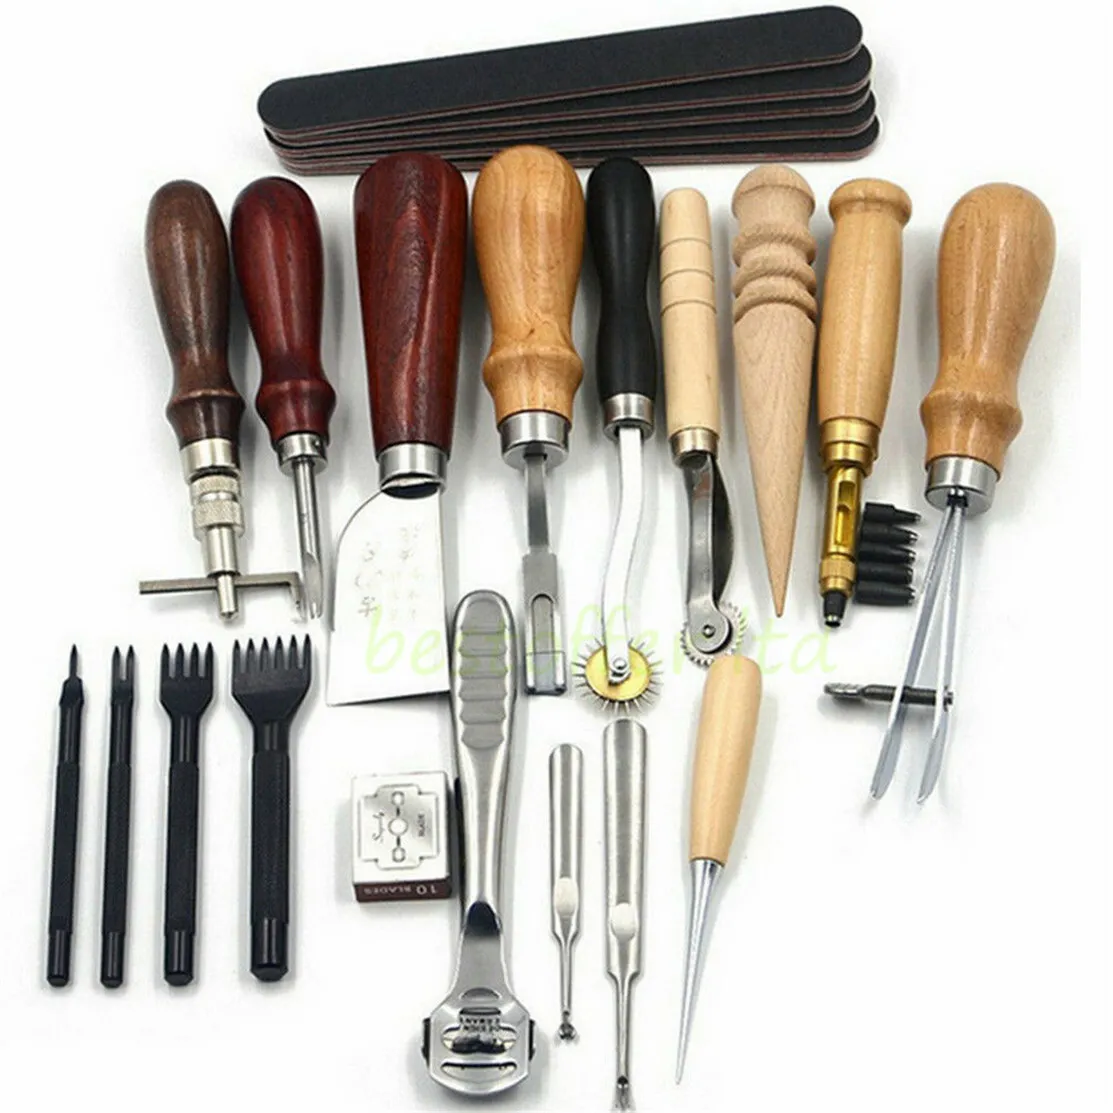 Leather Working Tools Kit, Leathercraft Kit Include Leather Tool Holder,  Leather Rivets and Snaps Set, Leather Stamping Tools, Leather Crafting  Tools